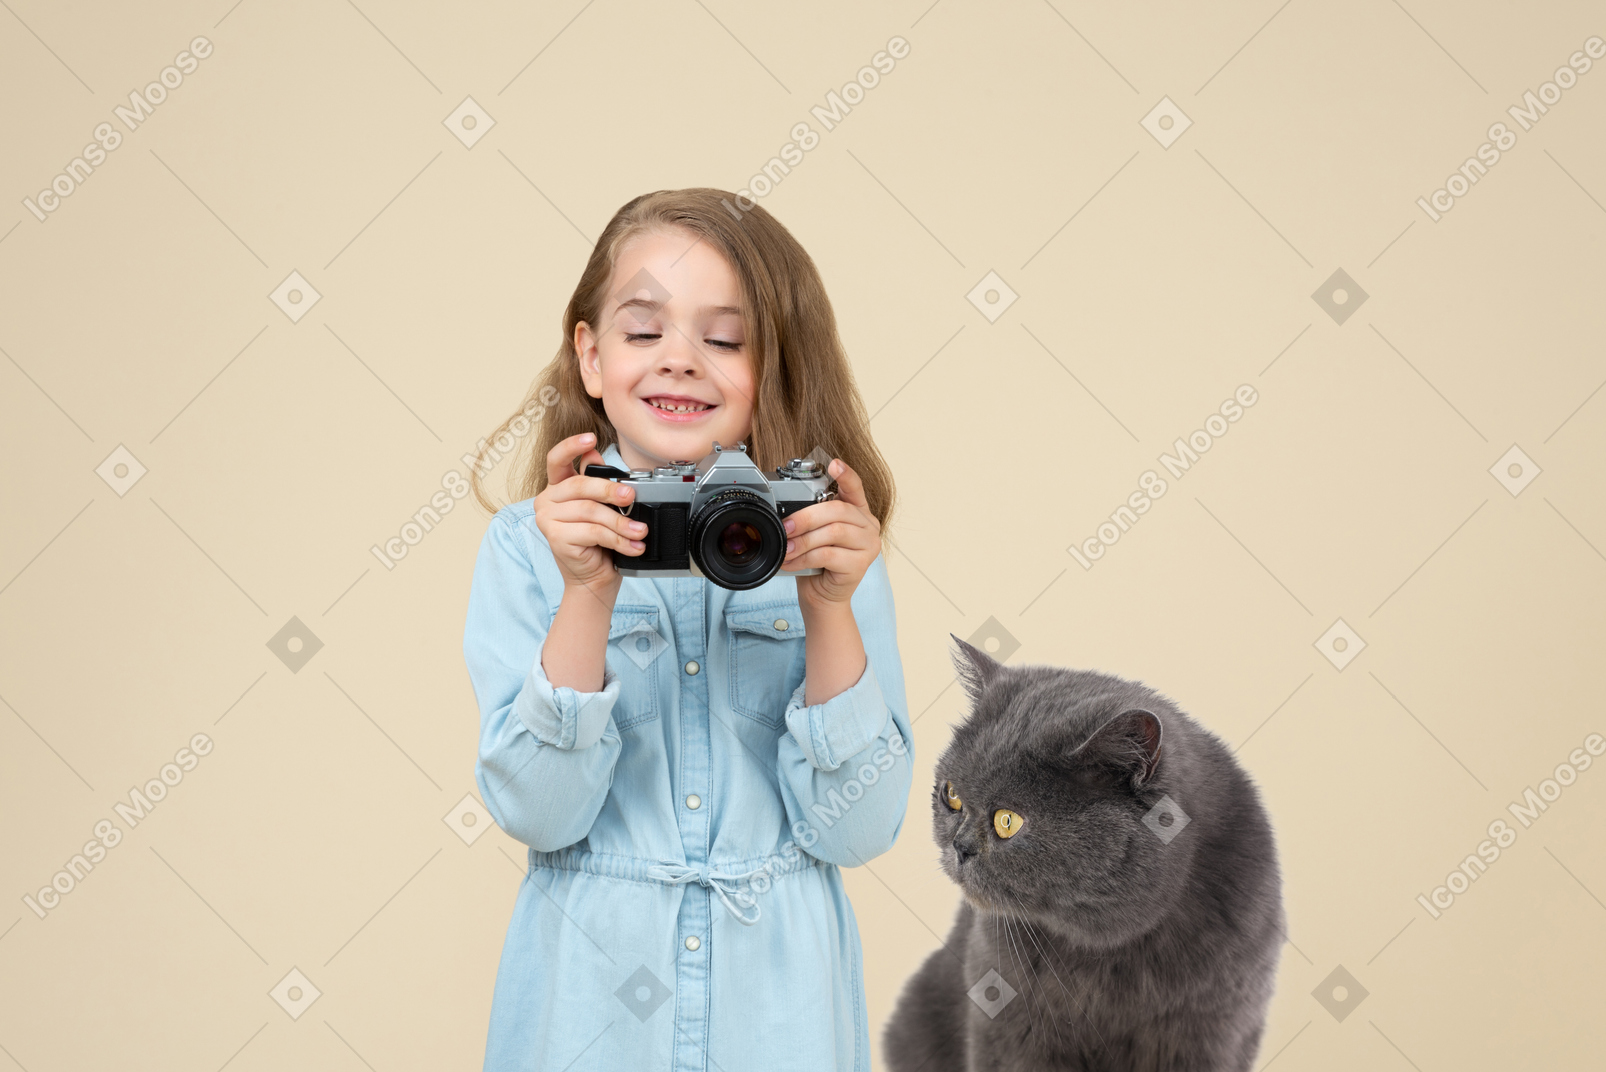 Cute little girl taking pictures of her cat